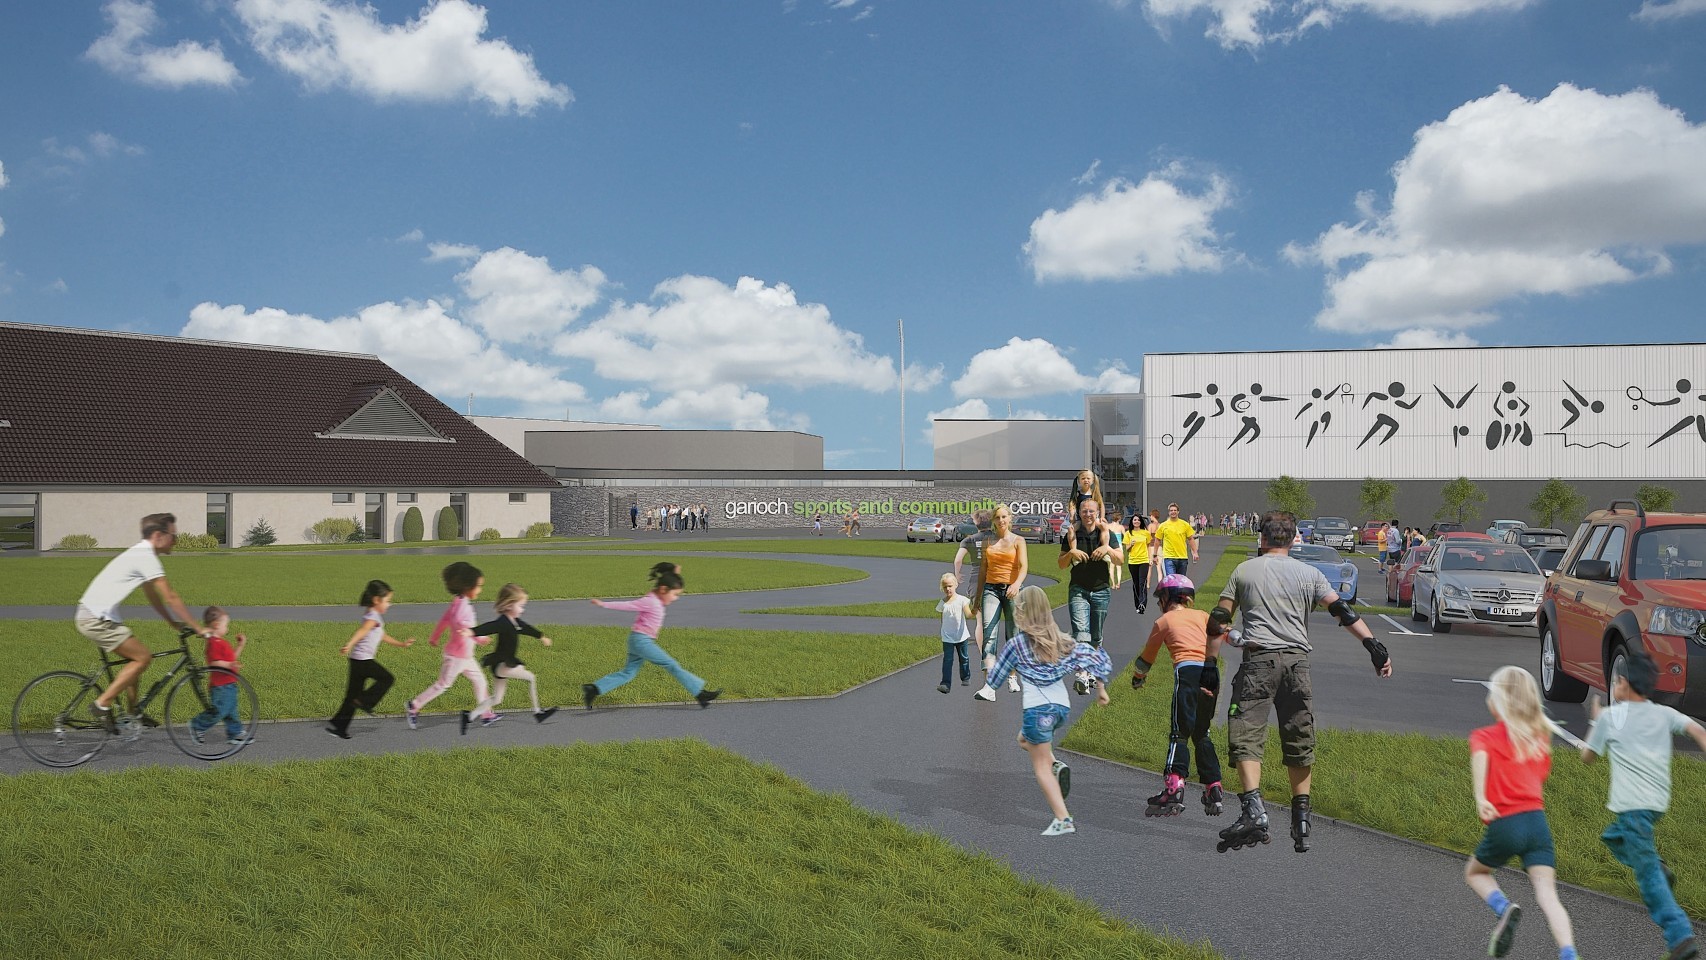 How the Garioch Sports and Community Centre could look